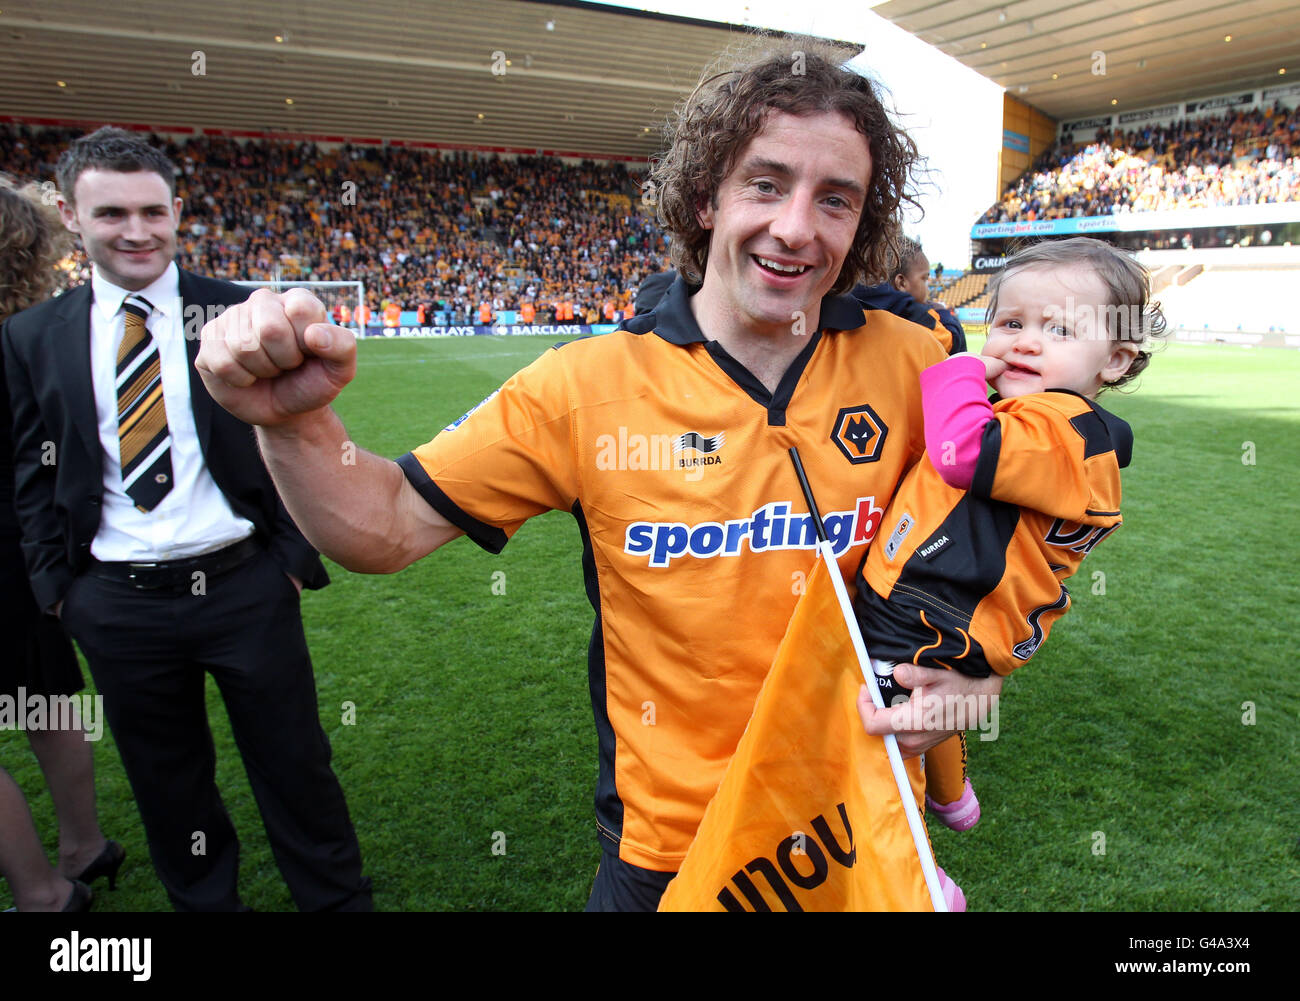 wolverhampton-wanderers-stephen-hunt-celebrates-with-his-daughter-G4A3X4.jpg